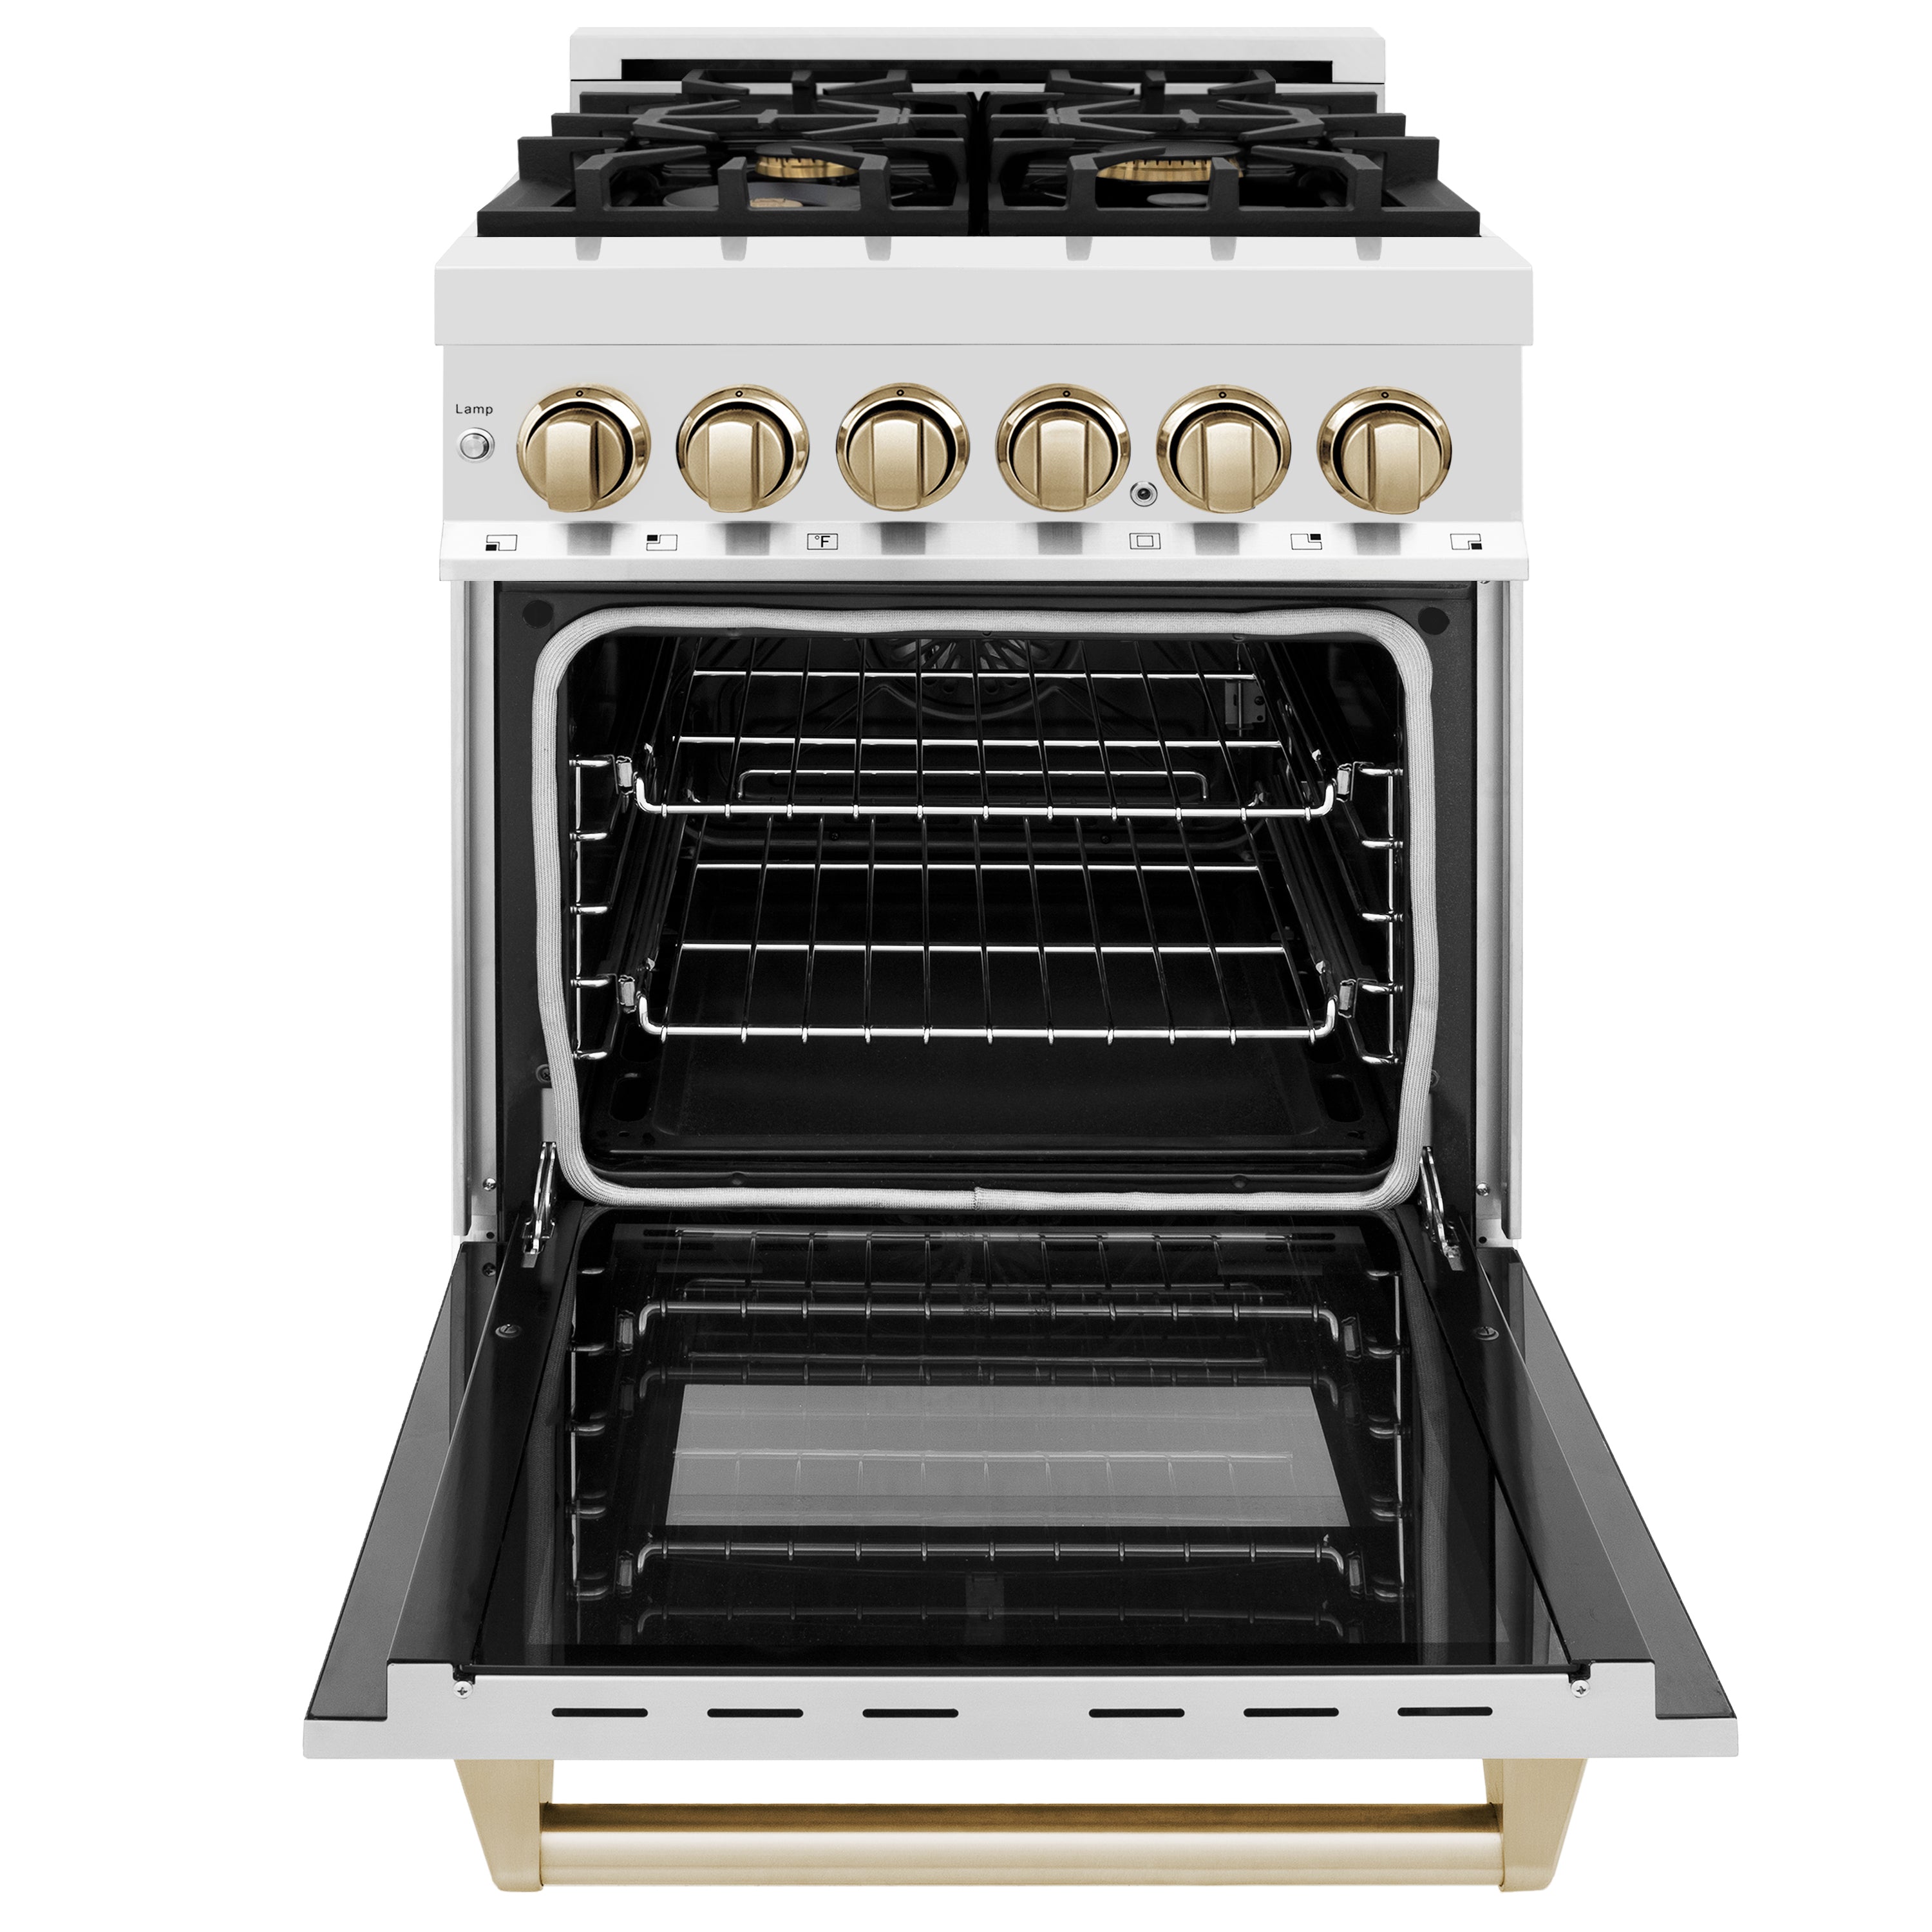 ZLINE Autograph Edition 24" 2.8 cu. ft. Dual Fuel Range with Gas Stove and Electric Oven in Stainless Steel with Polished Gold Accents (RAZ-24-G)